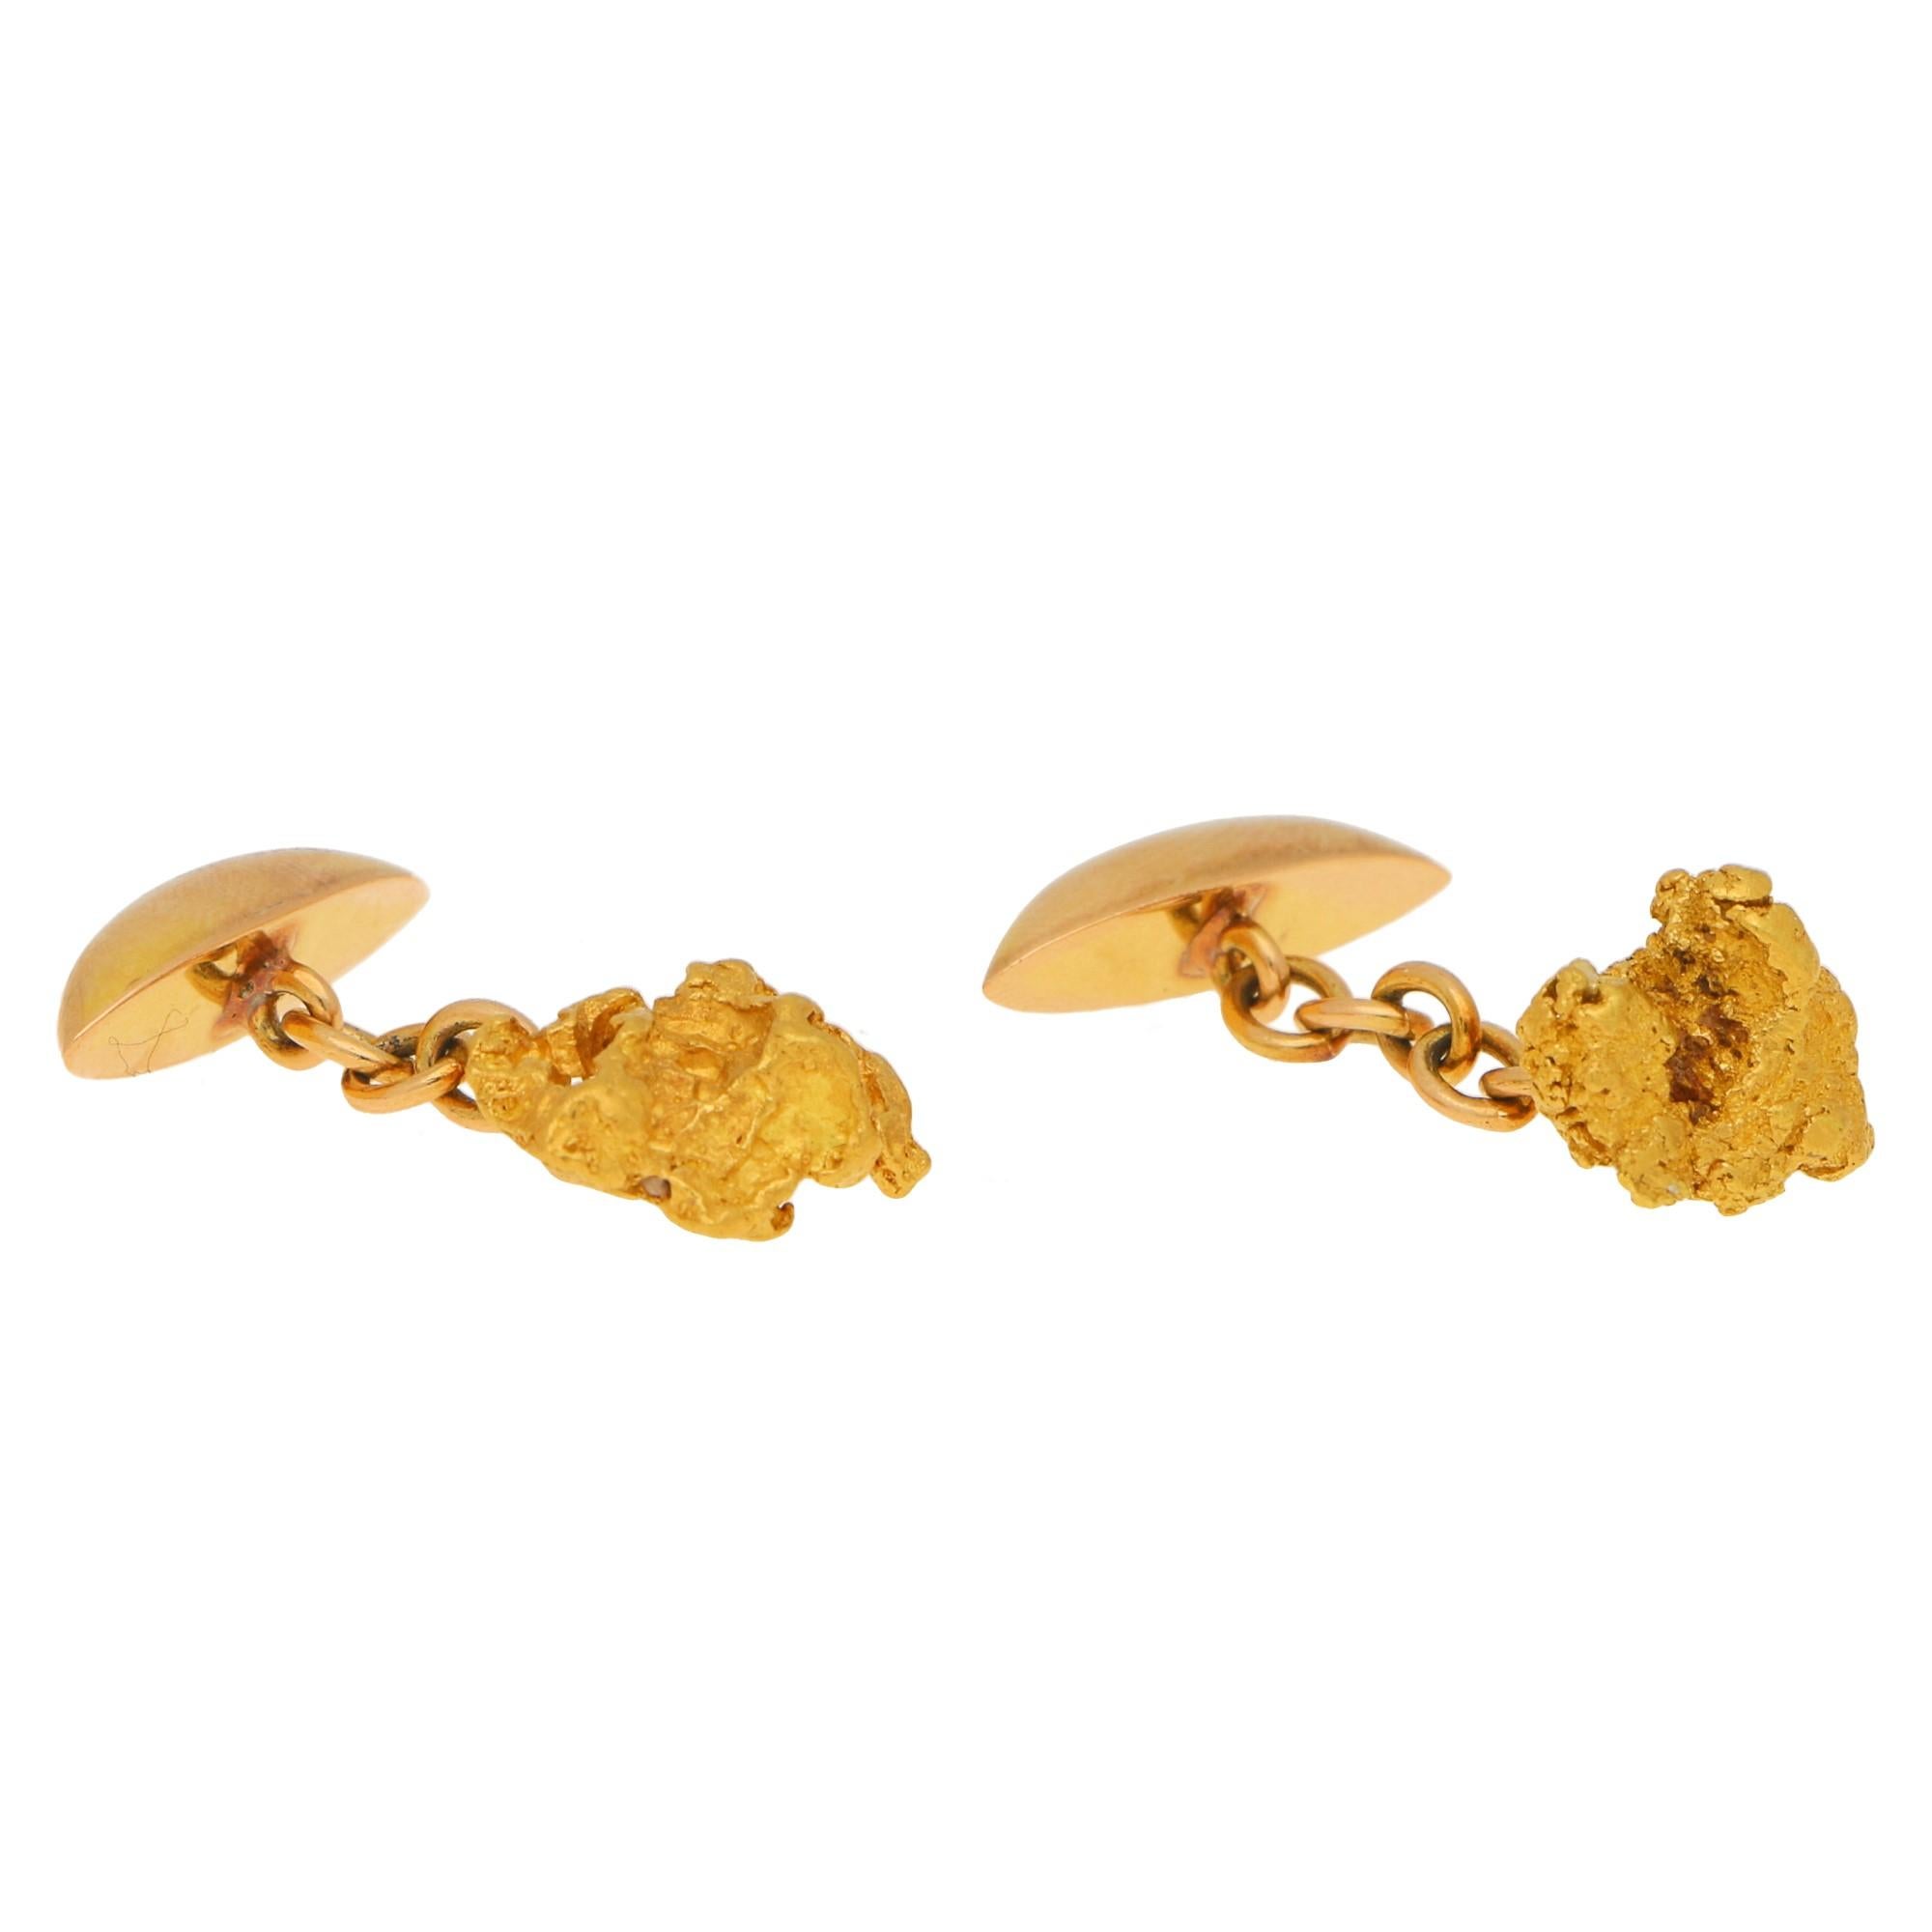 An unusual pair of hand crafted cufflinks with a rough ingot (gold nuggets) linked by chain to a torpedo style link with a flat back. 

What makes these cufflinks so marvellous is that parts of the host rock can be seen in some cavities in the